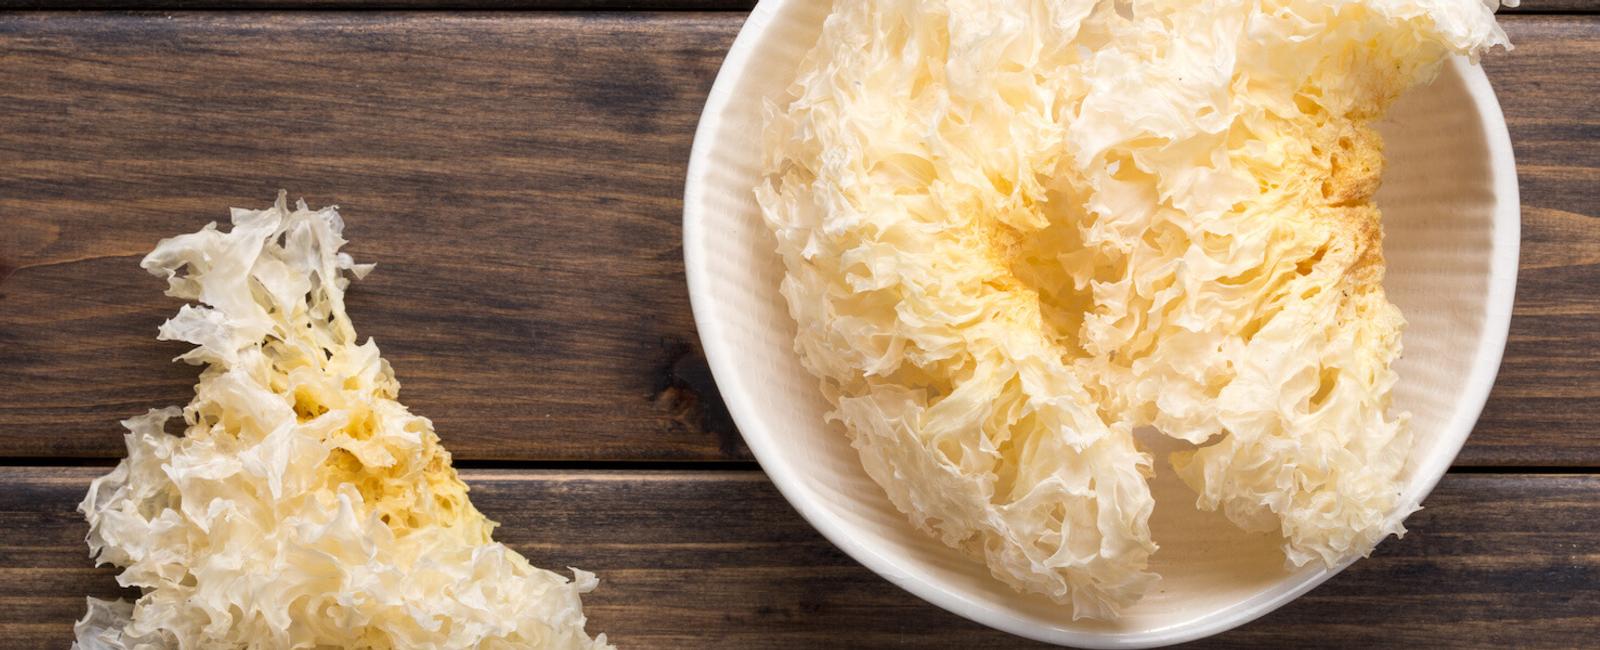 The Complete Guide to Tremella Mushroom